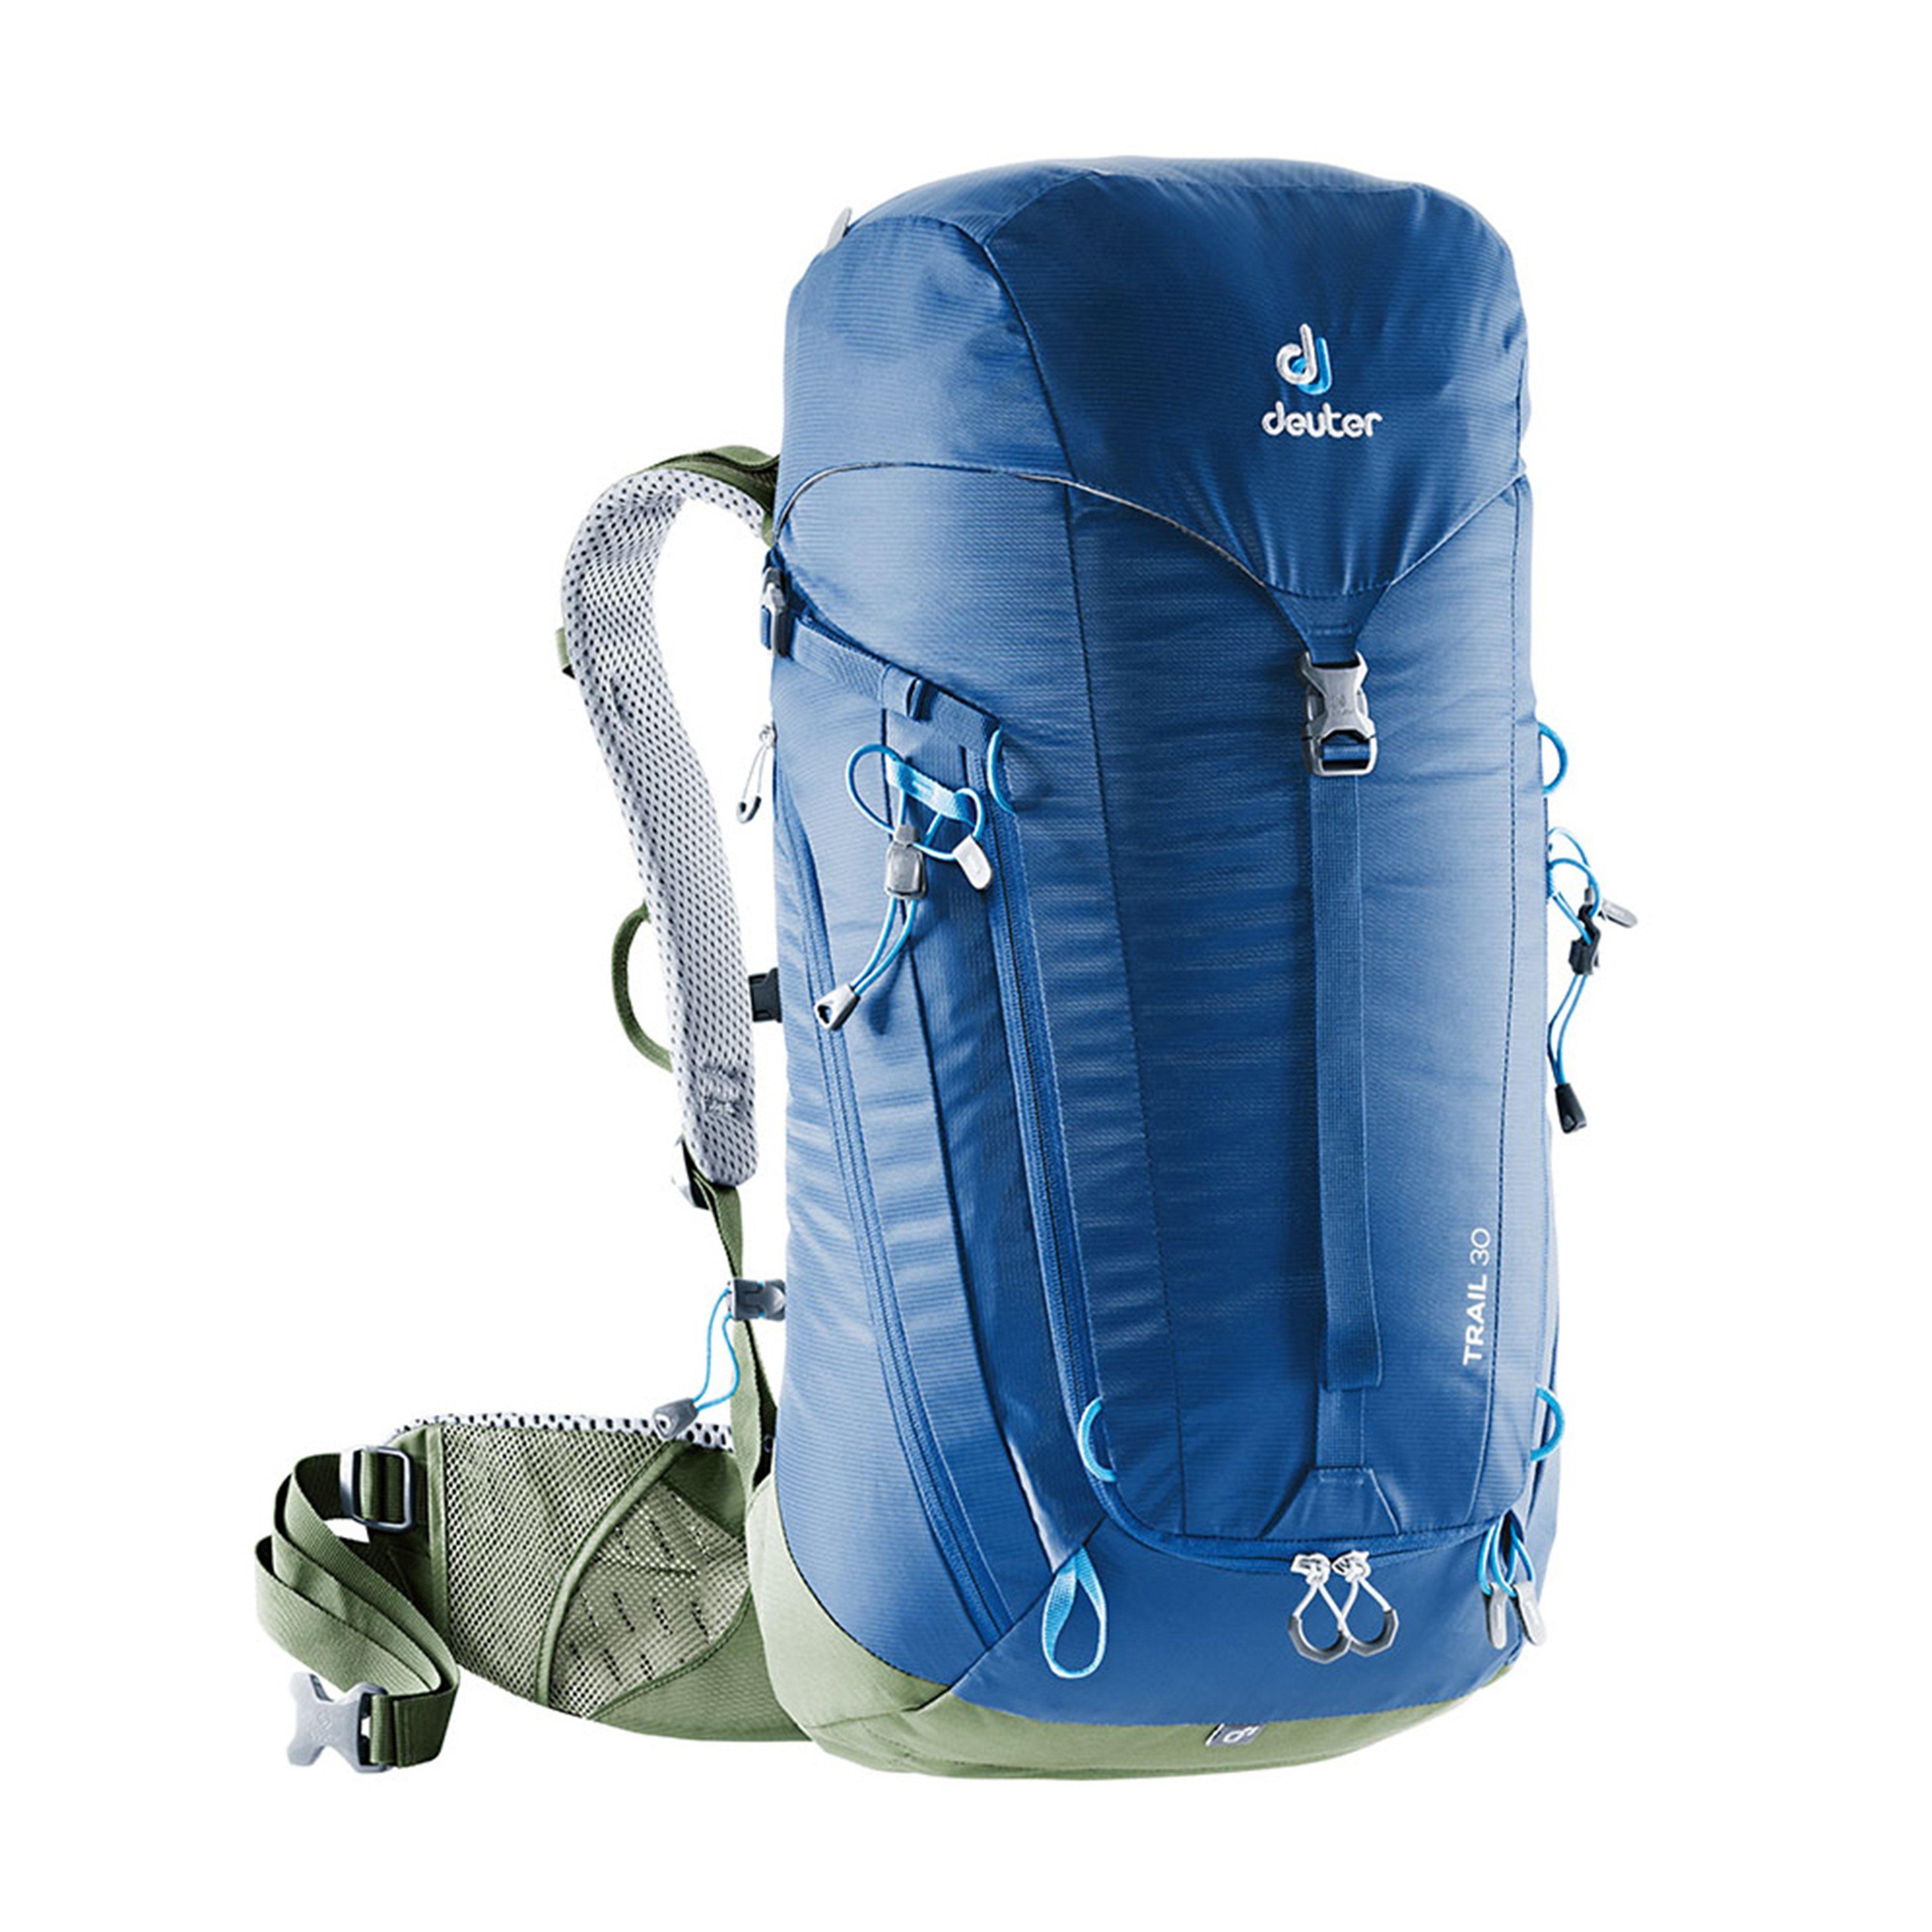 Deuter Trail 30 Backpack Review